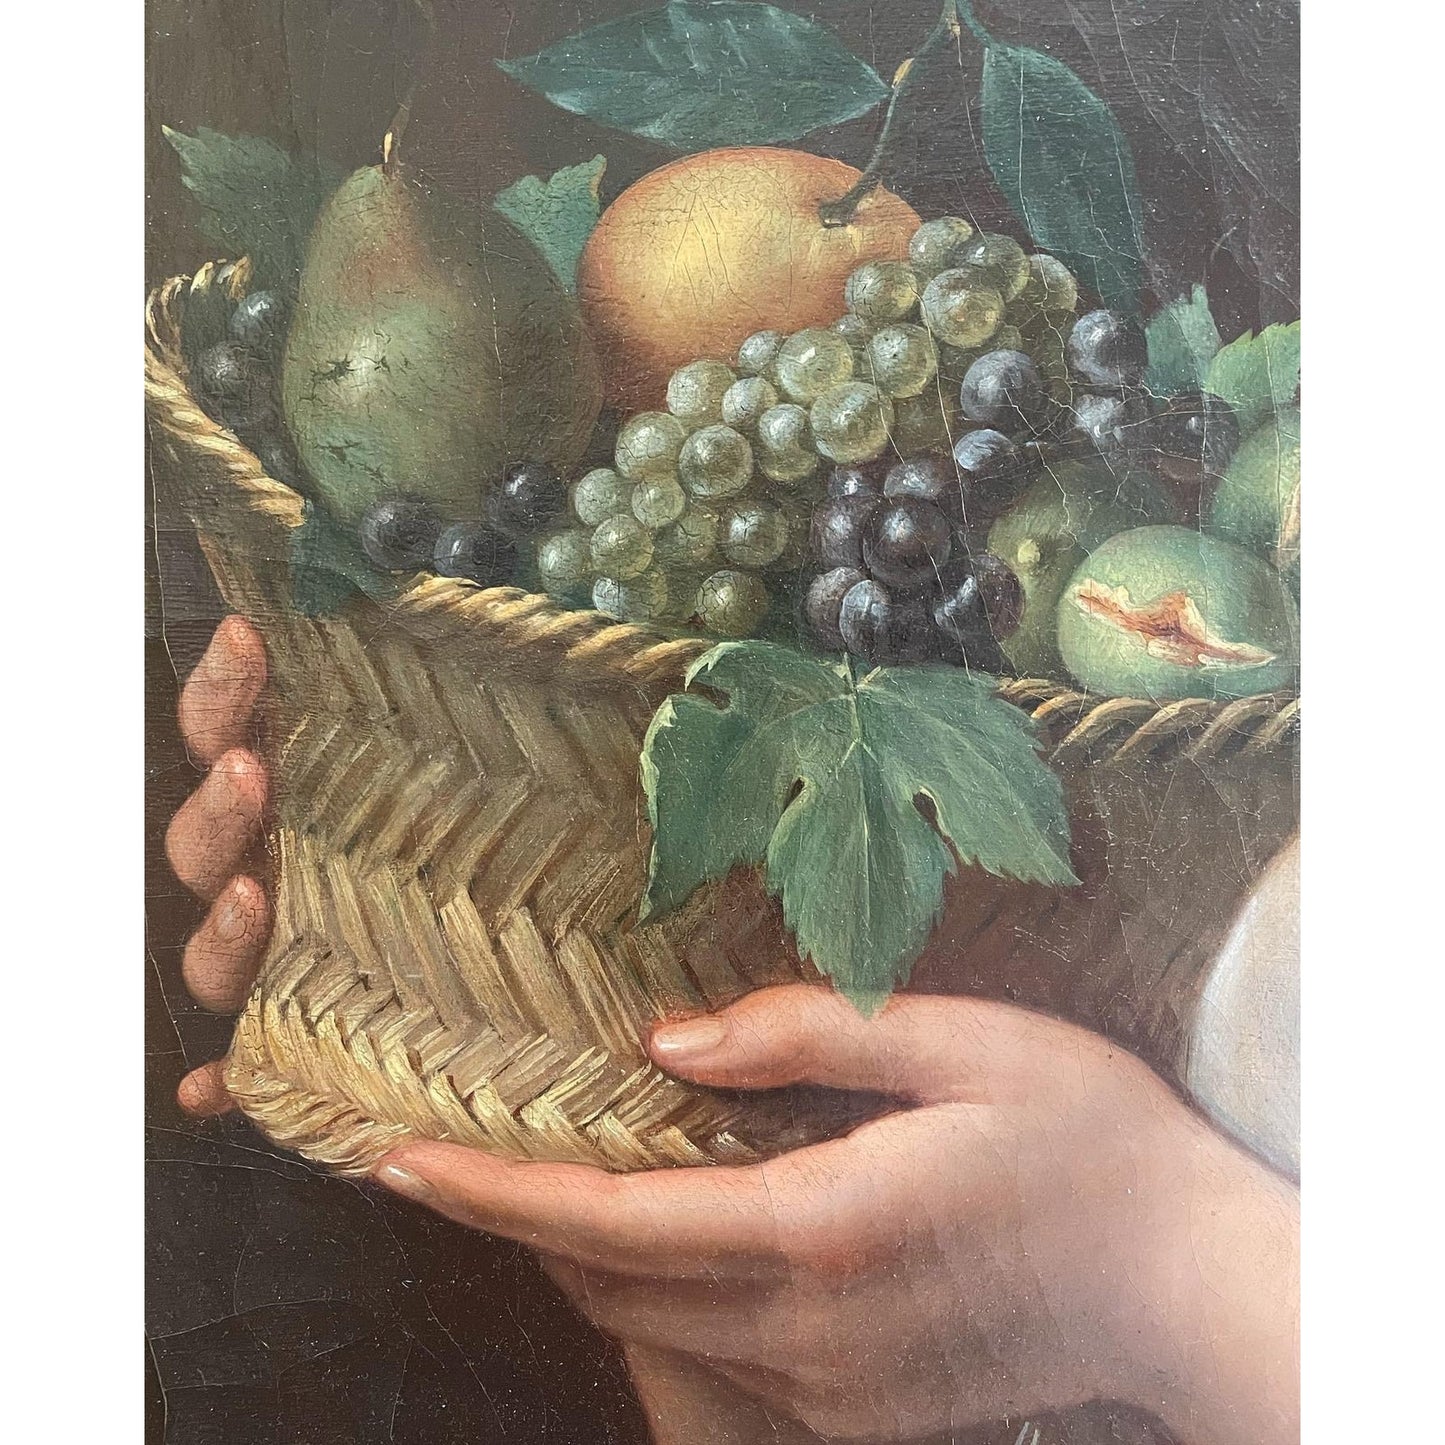 Antique Oil on Canvas of an Attractive Young Woman Holding a Basket of Fruit